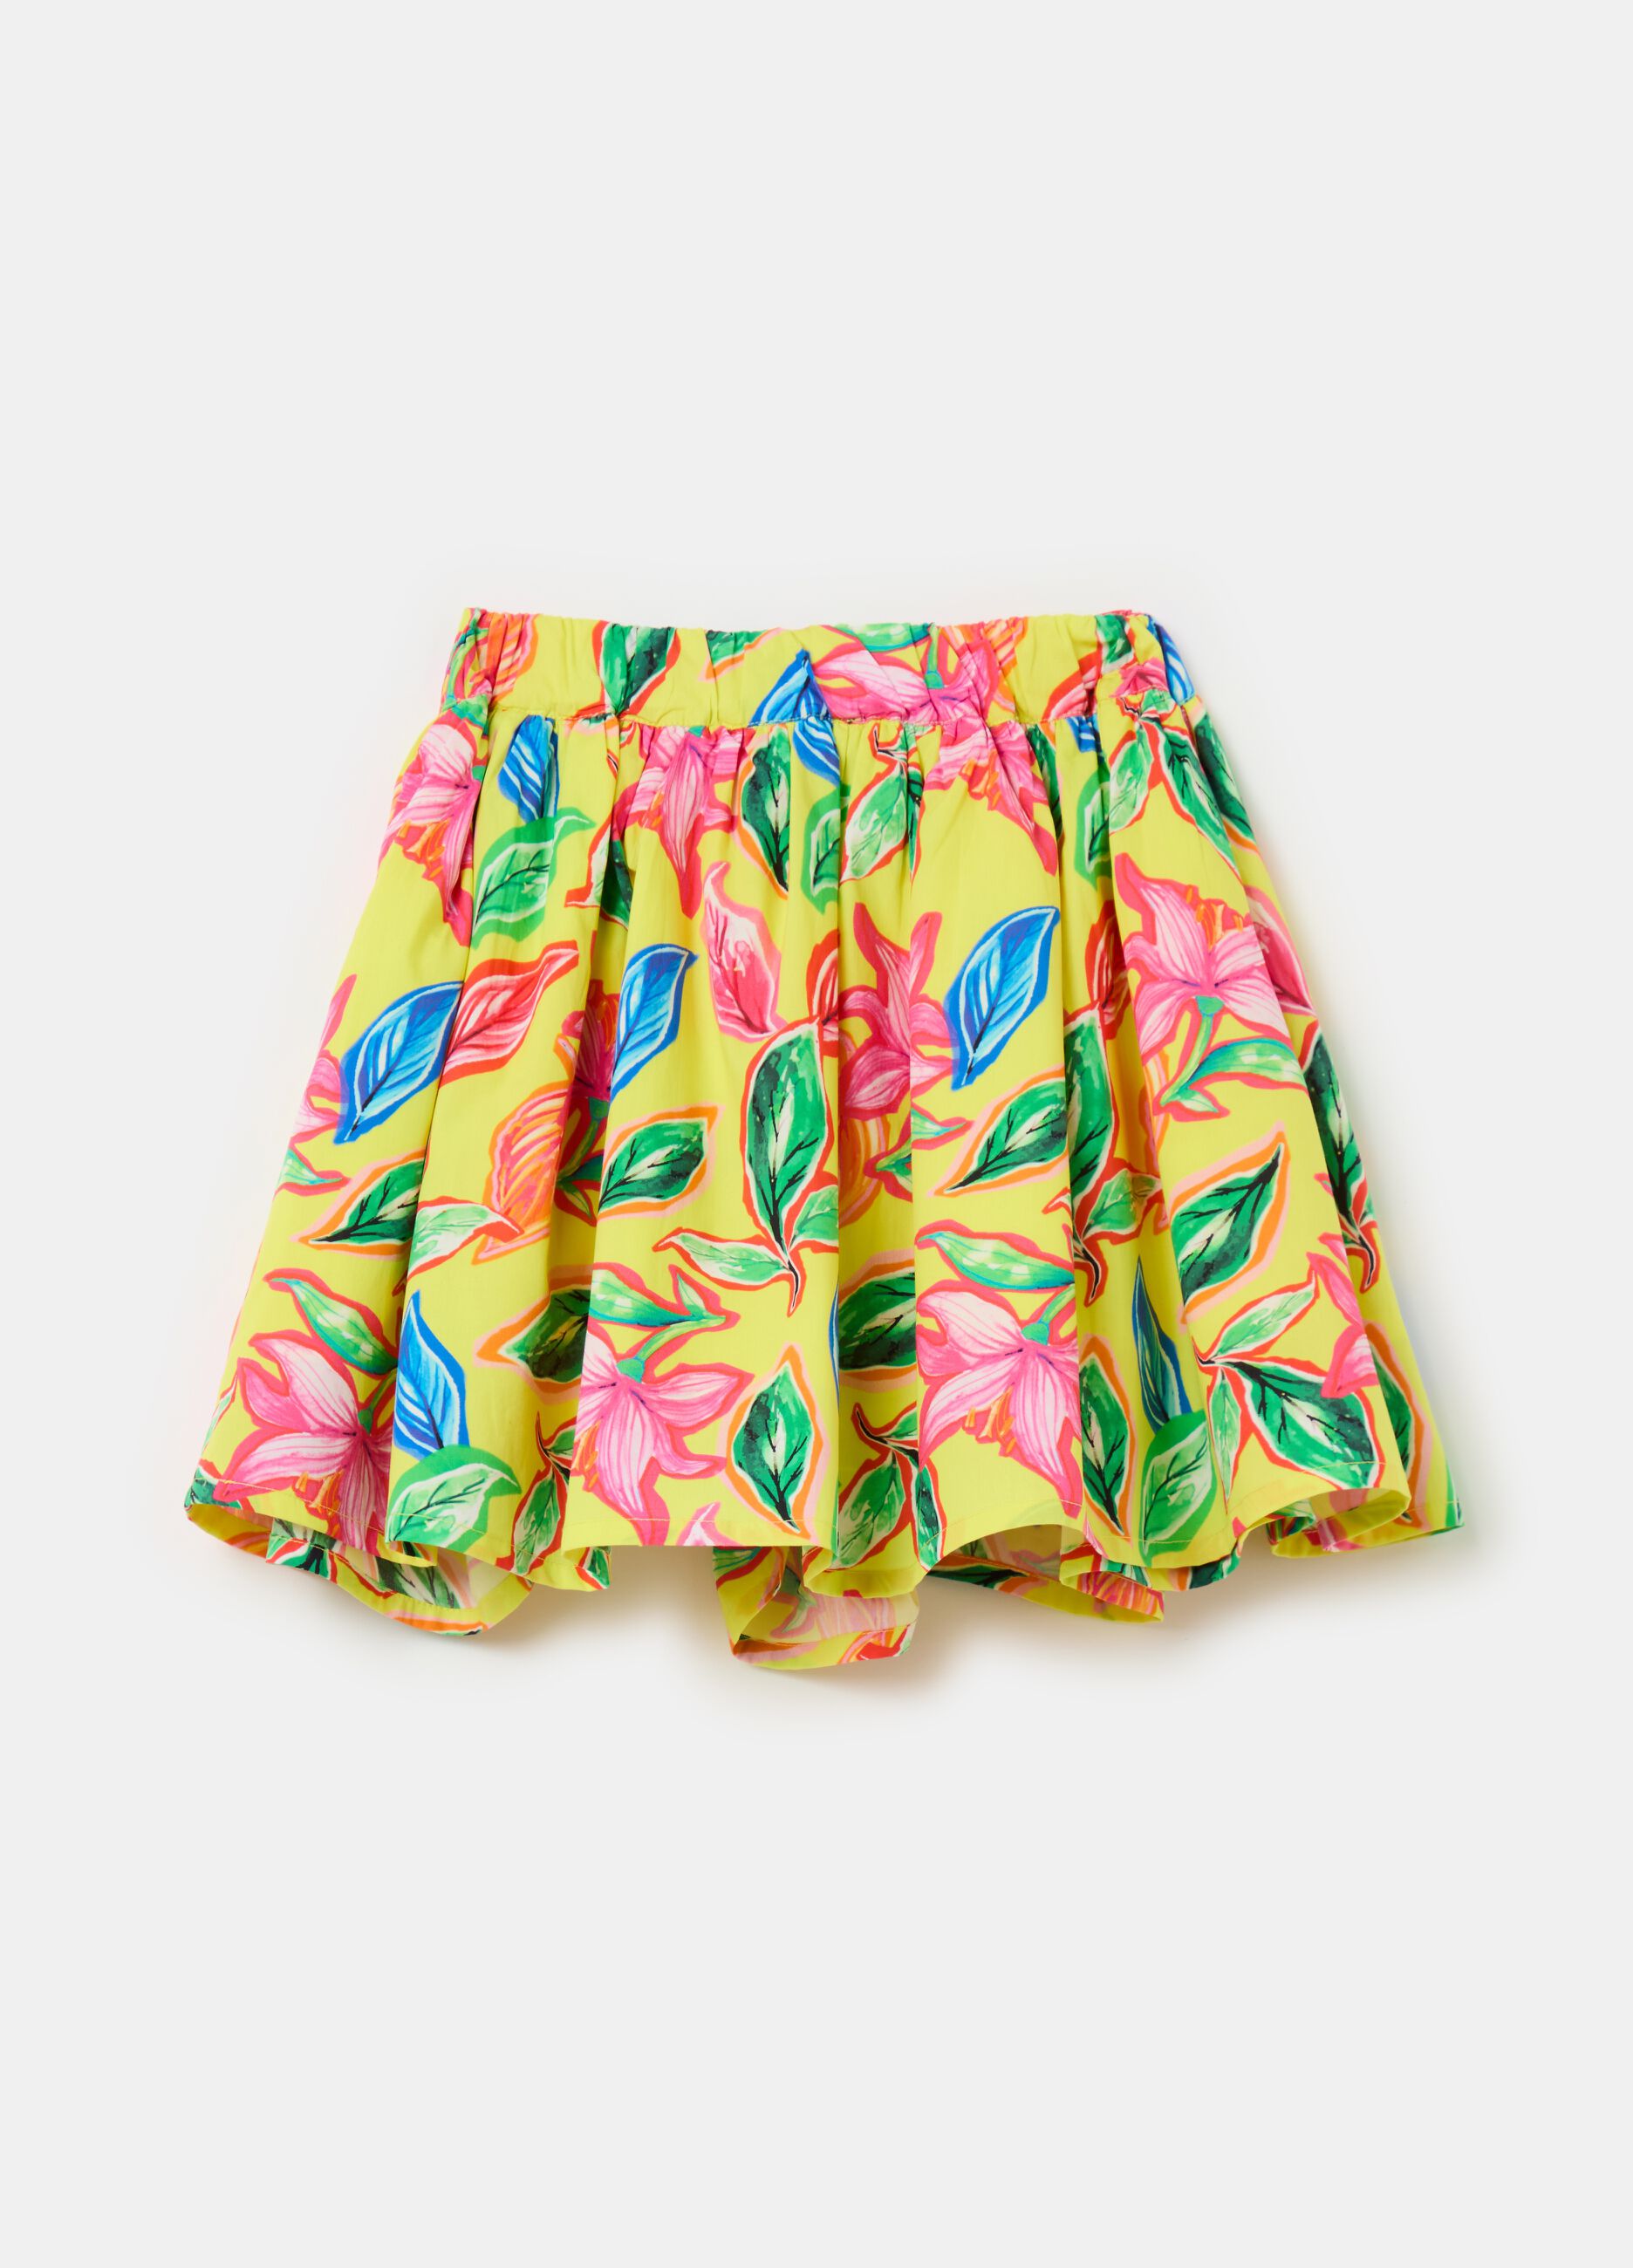 Cotton skirt with floral pattern